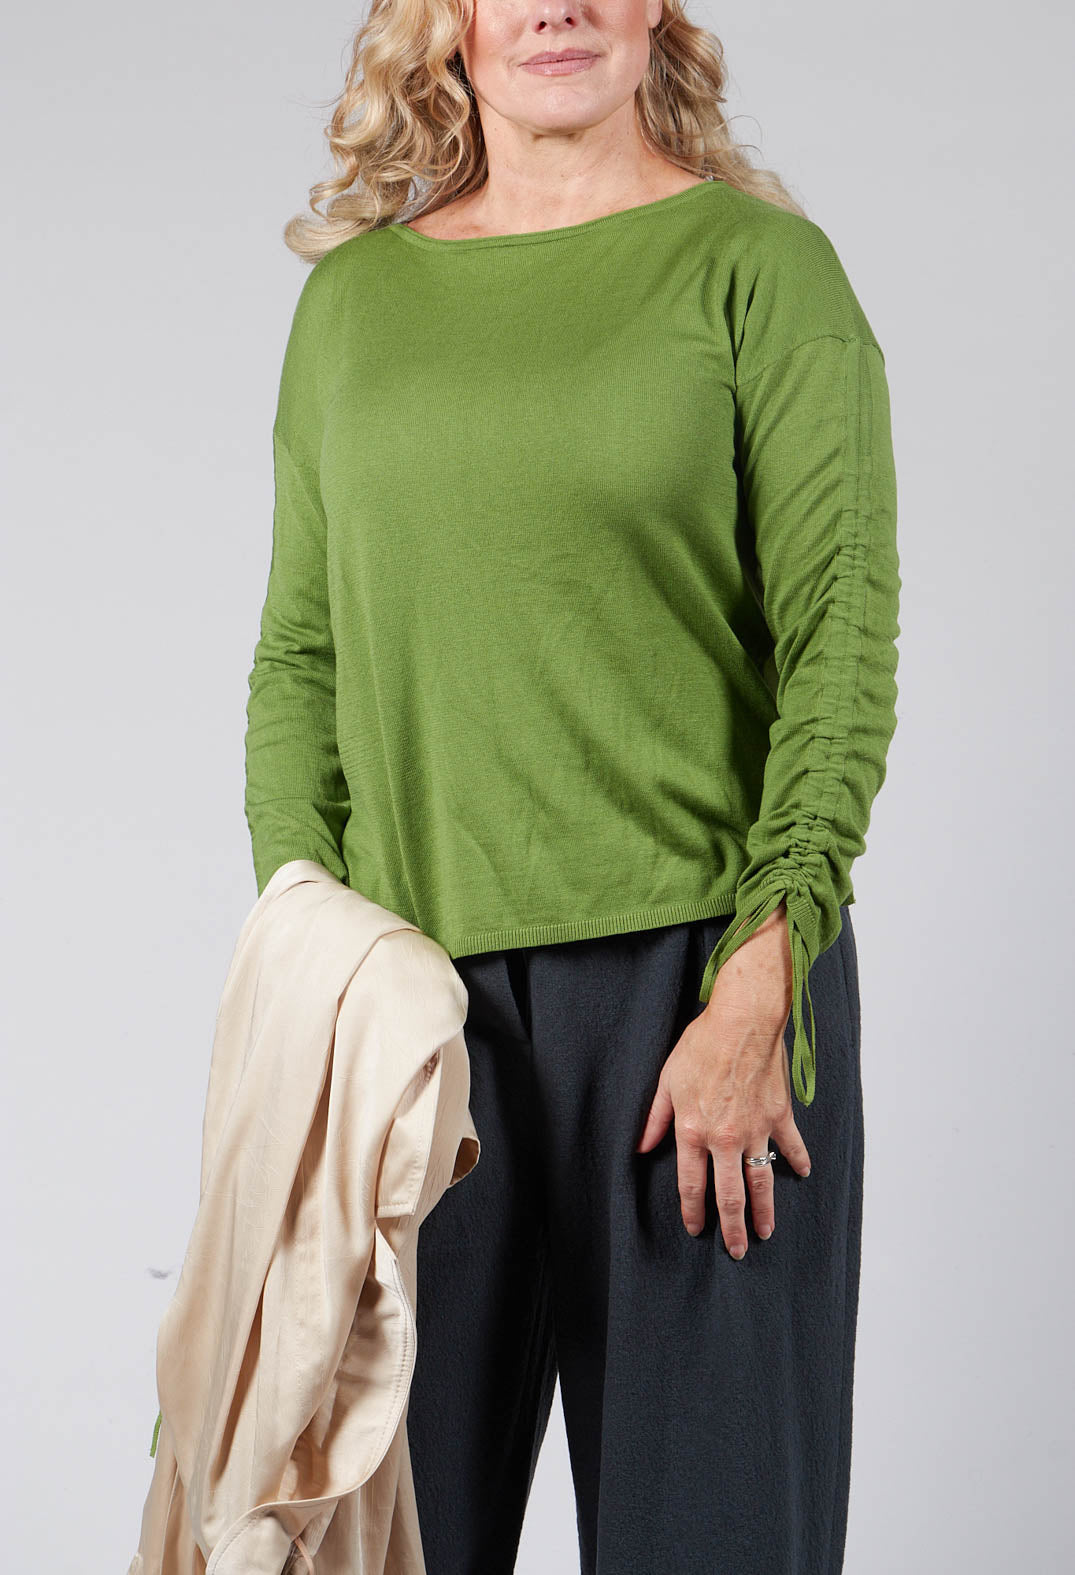 Fine Knit Top with Tie Sleeves in Verde Muschio